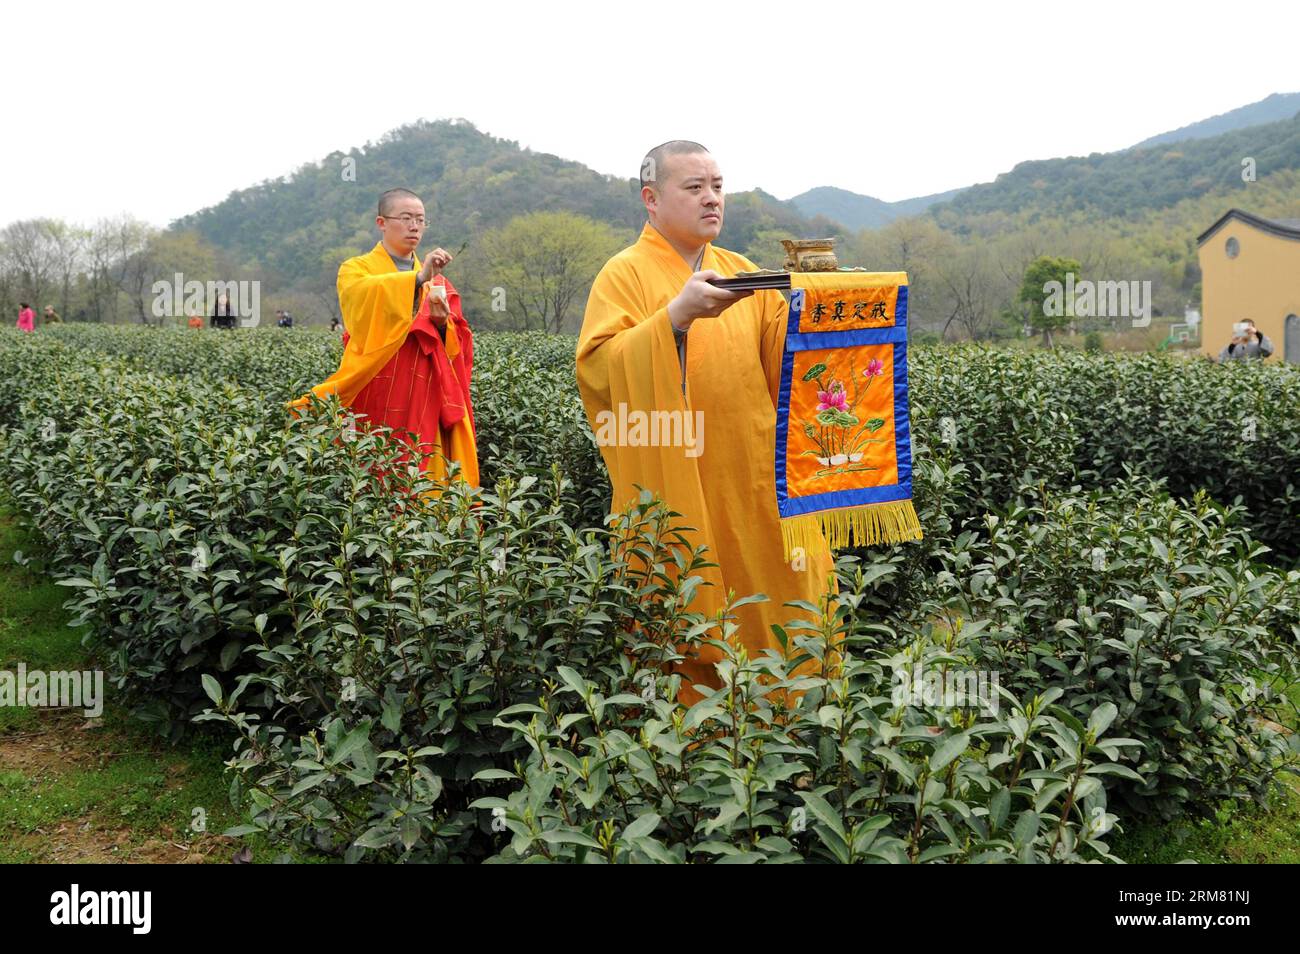 (140324) -- HANGZHOU, March 24, 2014 (Xinhua) -- Monks hold a cleaning ceremony before picking tea at a tea garden in Fajing Buddha Temple in Hangzhou, capital of east China s Zhejiang Province, March 24, 2014. More than 40 monks in the Fajing Temple began to pick Fajing zen tea belonged to the temple Monday. The Fajing zen tea, produced within the origin area of West Lake Dragon Well(Longjing) Tea, is planted, picked and drinked by monks themselves in the temple. Zen tea is a special tea culture for Buddhists to be enlightened with Buddha dharma through tea making and drinking. (Xinhua/Ju Hua Stock Photo